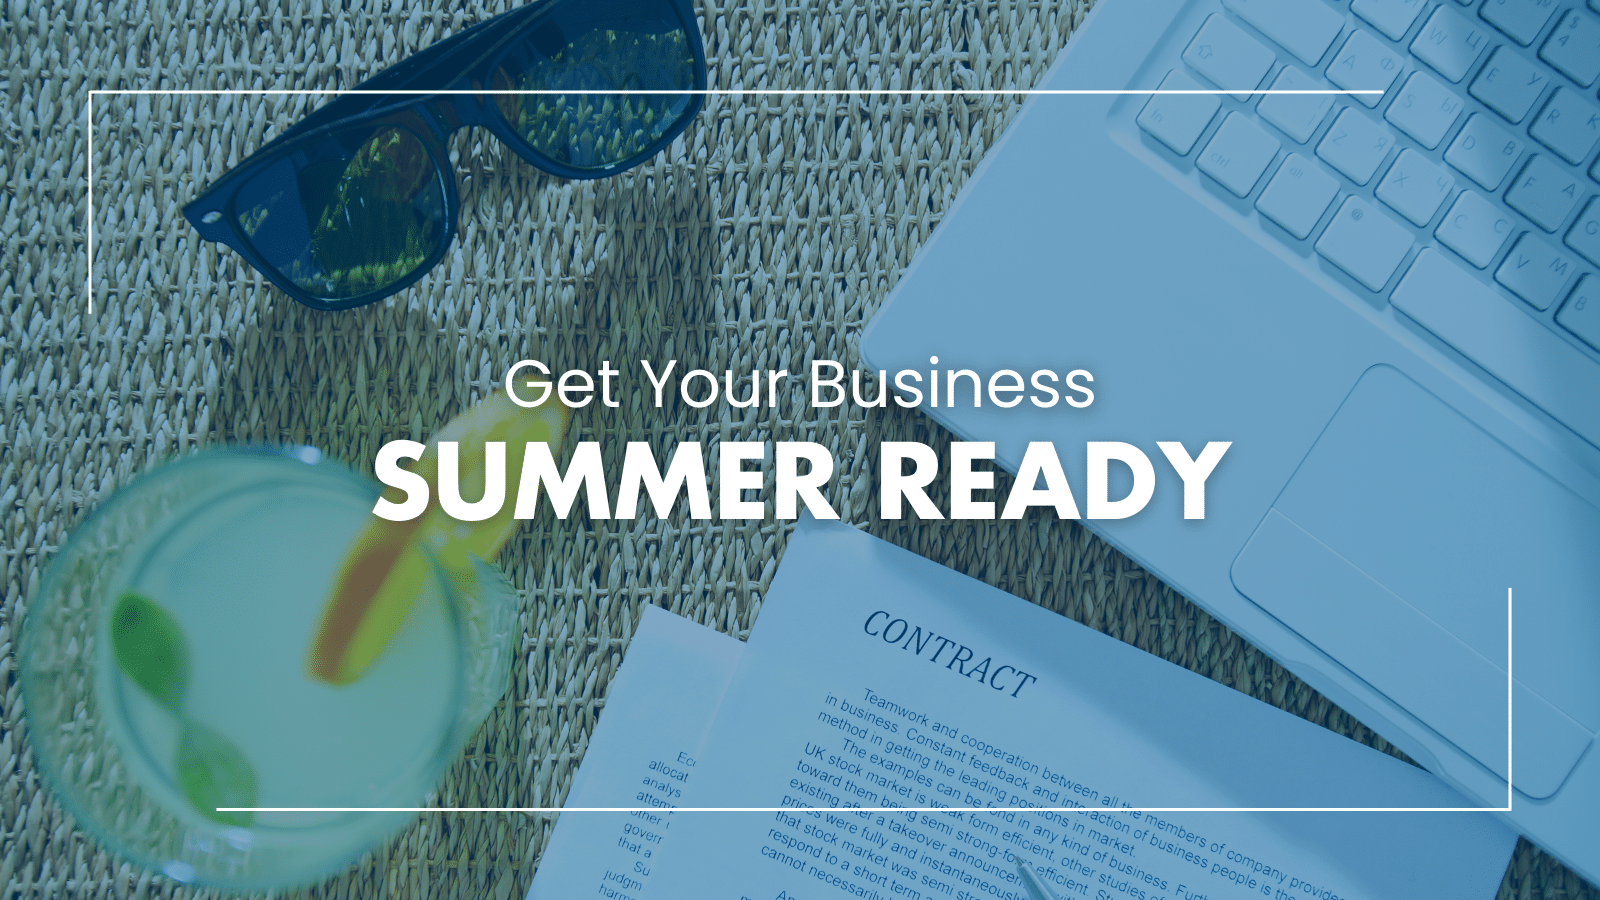 Get Your Business Summer Ready